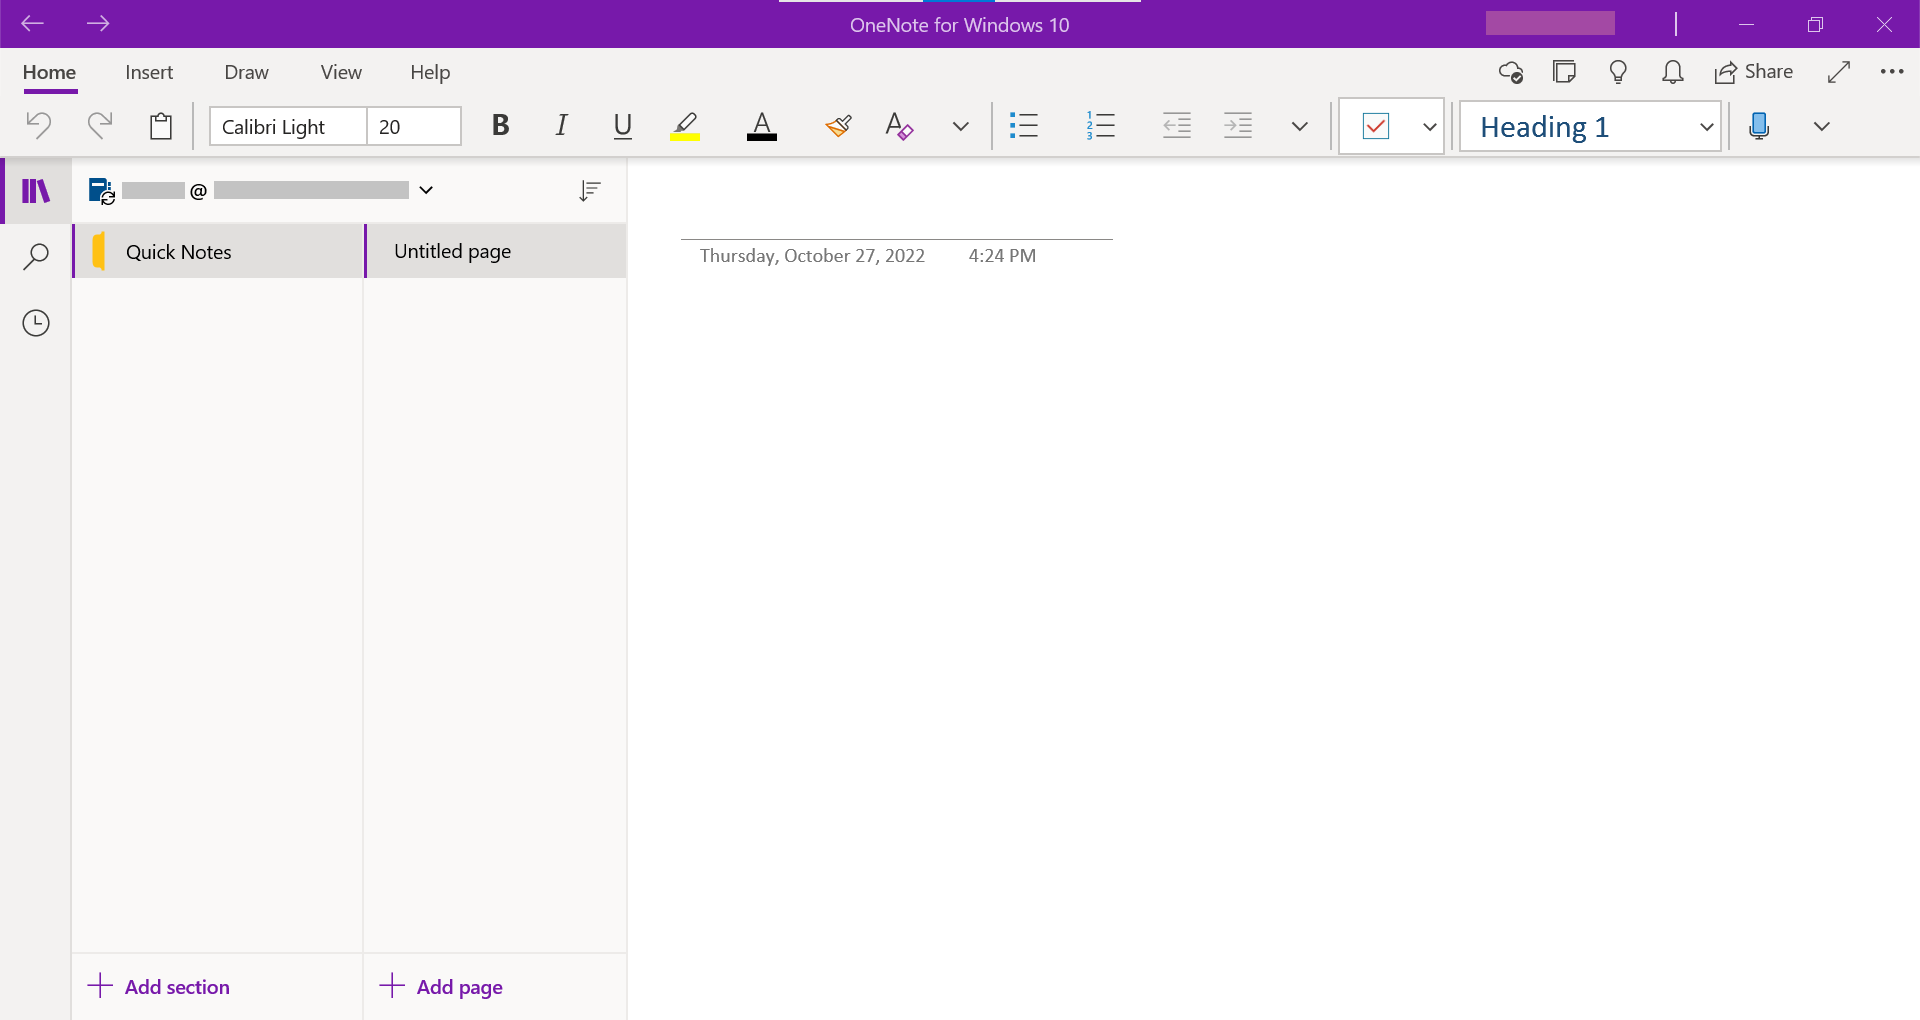 Overview of local OneNote installation